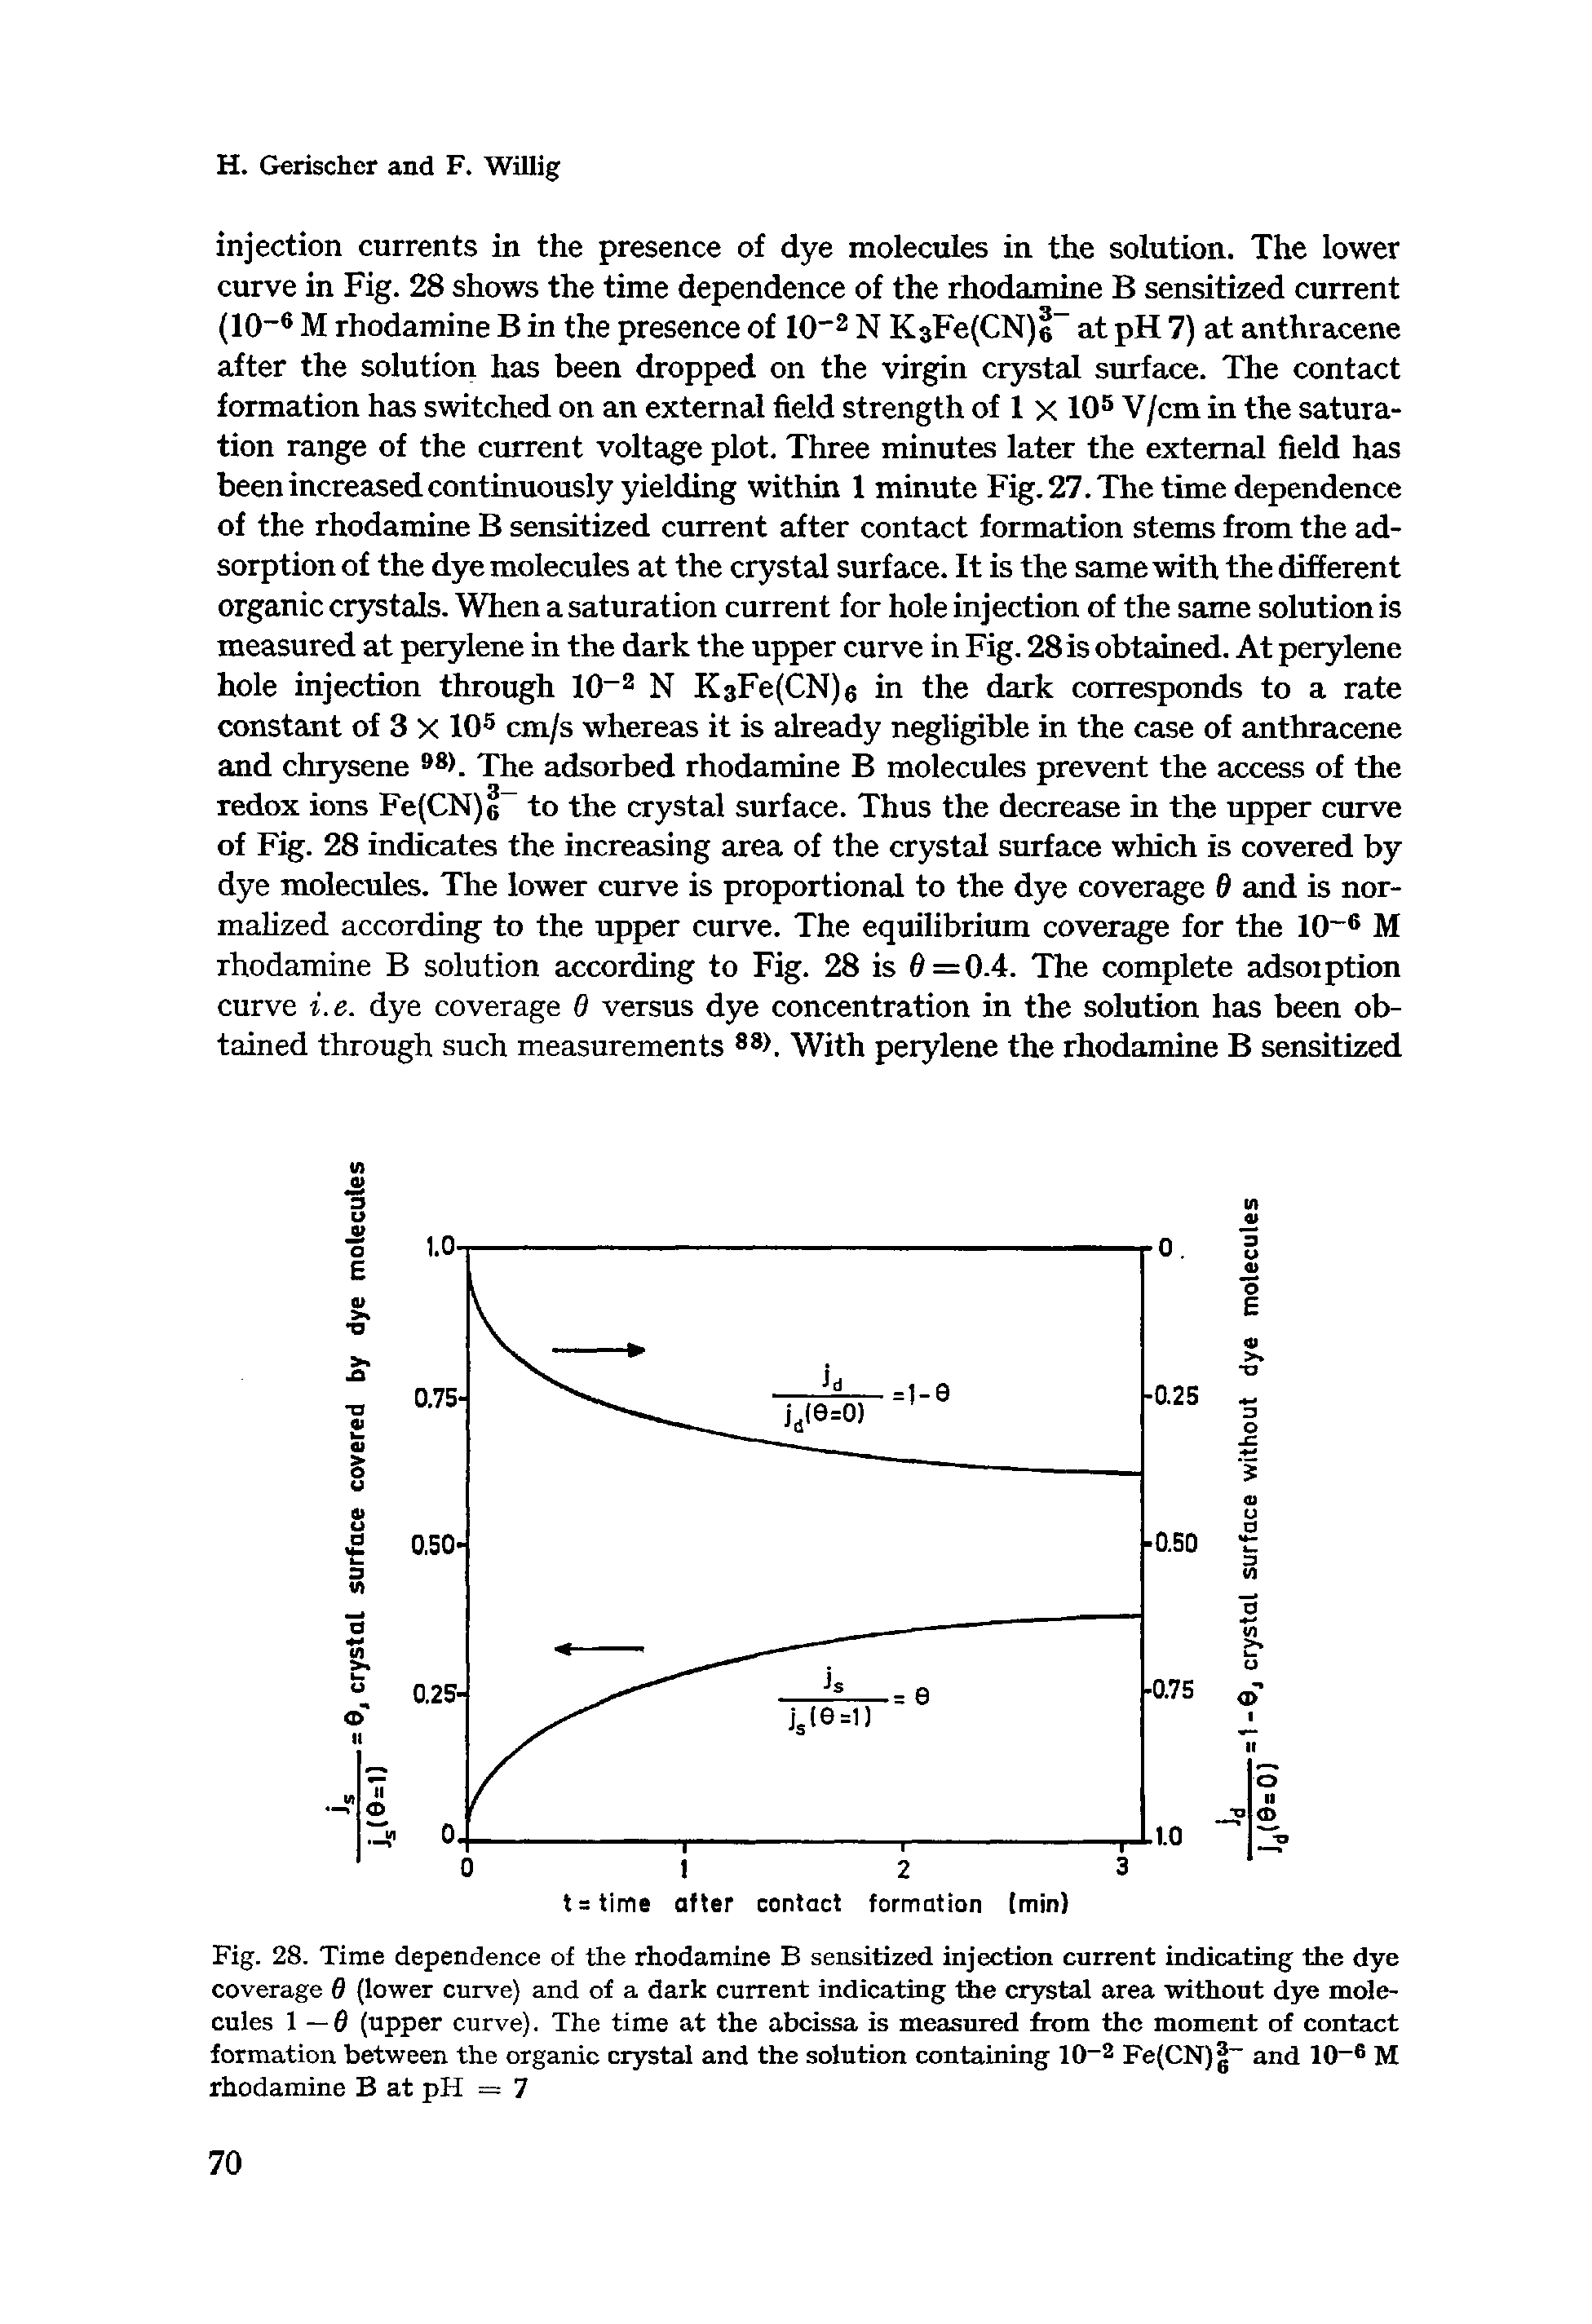 Fig. 28. Time dependence of the rhodamine sensitized injection current indicating the dye coverage (lower curve) and of a dark current indicating the crystal area without dye molecules 1—0 (upper curve). The time at the abcissa is measured from the moment of contact formation between the organic crystal and the solution containing 10-2 Fe(CN) and 10-6 M rhodamine at pH = 7...